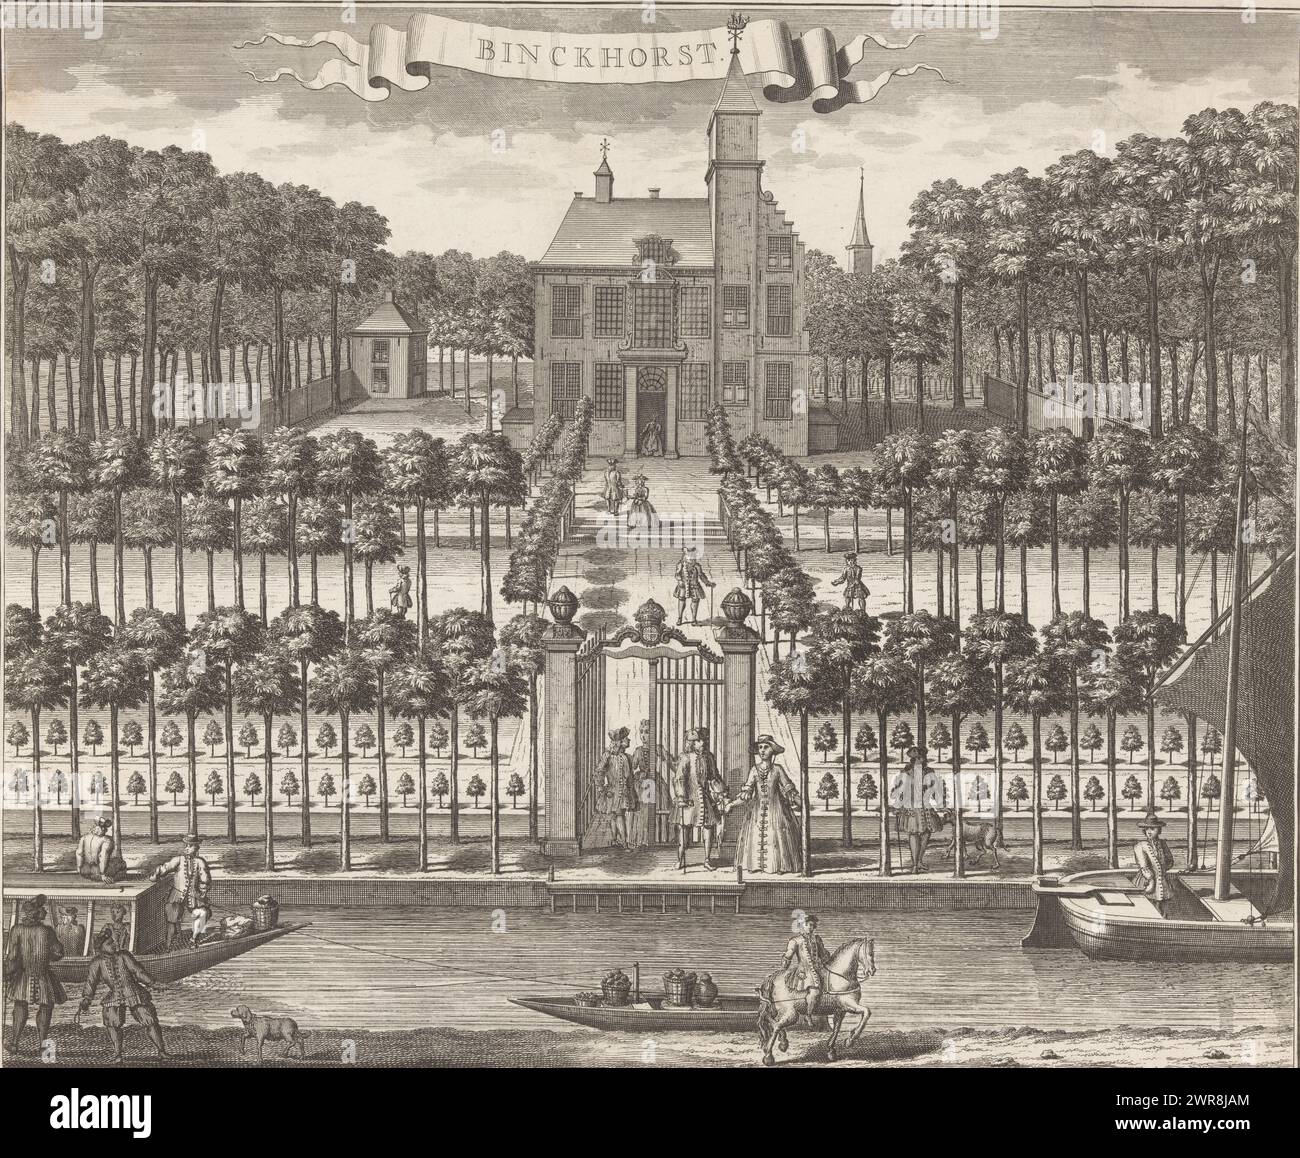 View of Kasteel de Binckhorst in The Hague, Binckhorst (title on object), print maker: anonymous, after drawing by: Gerrit van Giessen, publisher: Reinier Boitet, publisher: Delft, publisher: Amsterdam, 1730 - 1736, paper, etching, engraving, height 285 mm × width 345 mm, print Stock Photo